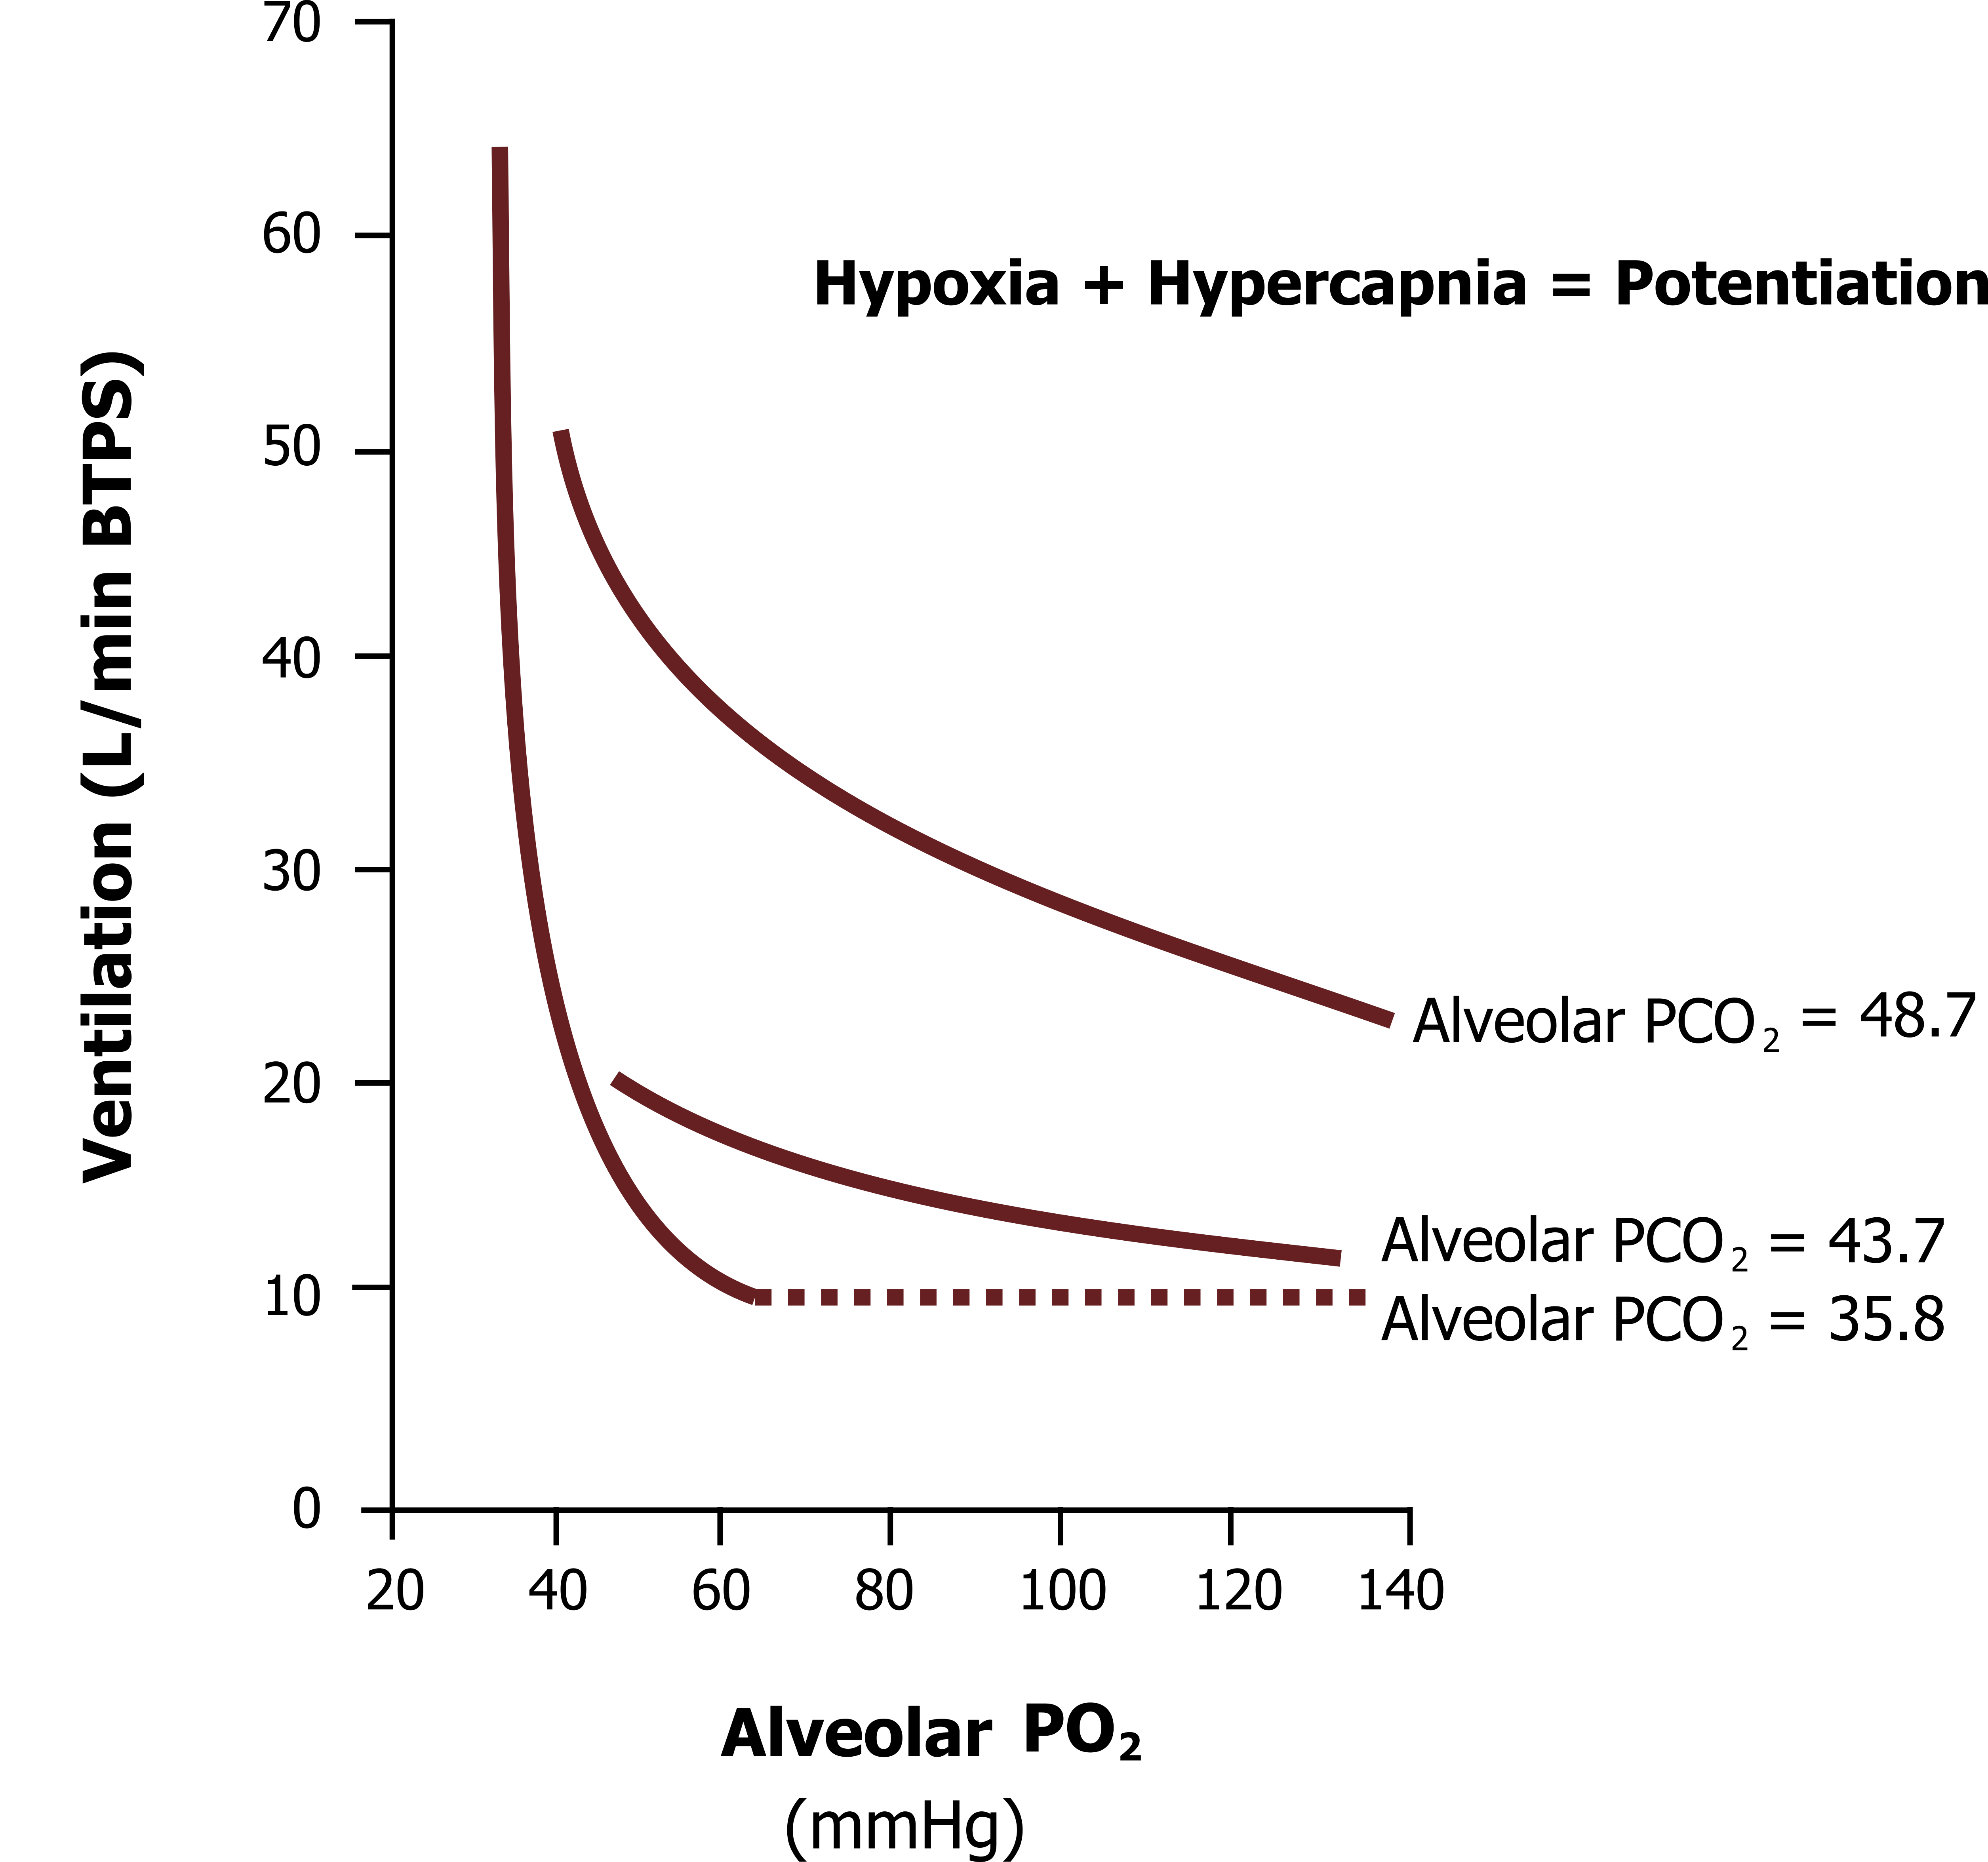 Graph with y-axis labeled Ventilation (L/min BTPS) ranging from 0 to 70 and x-axis alveolar P O2 (mm Hg) ranging from 20 to 140. 3 curves labeled with different Alveolar P CO2 values. 35.8: beginning at (40, 70), flattening out at (60, 10) and continuing as dotted lines until (140, 10). 43.7: beginning at (50, 20) and ending at (130, 12). 48.7: beginning at (42, 50) and ending at (140, 25). All values are approximate